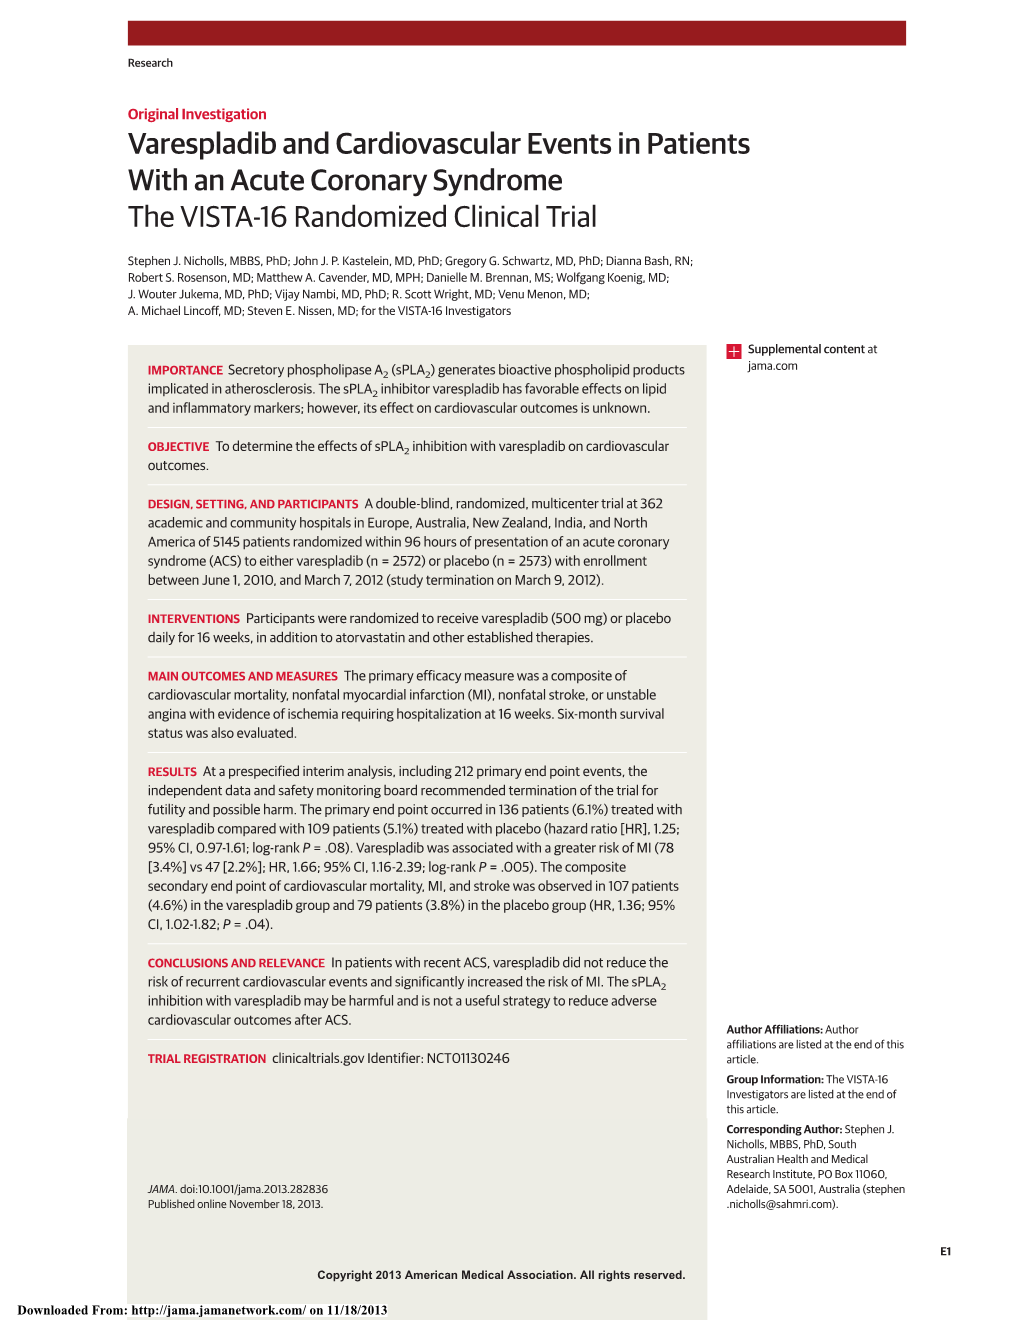 Varespladib and Cardiovascular Events in Patients with an Acute Coronary Syndrome the VISTA-16 Randomized Clinical Trial